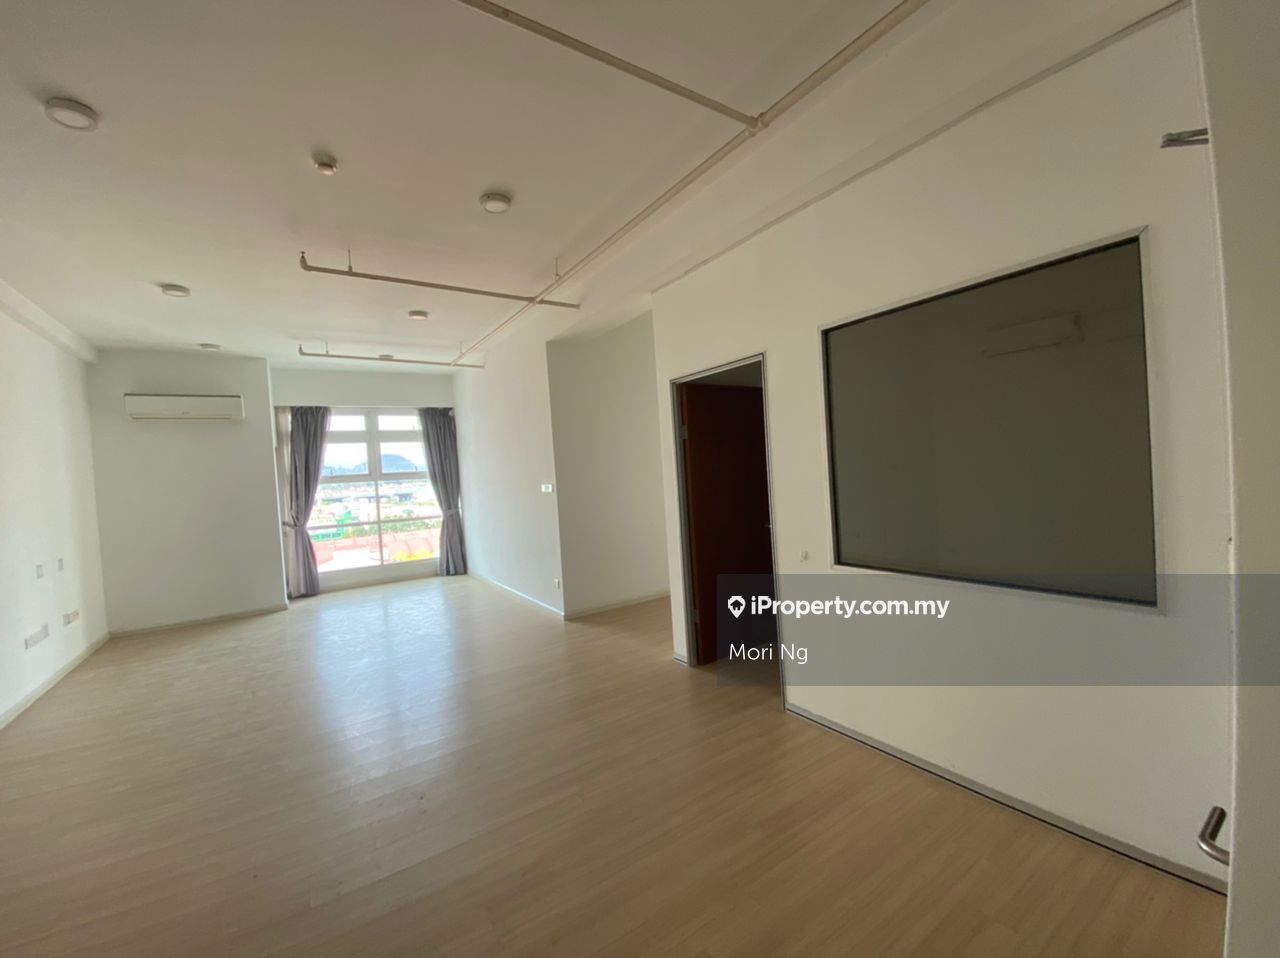 Sunway Nexis Intermediate Serviced Residence 2 bedrooms for sale in ...